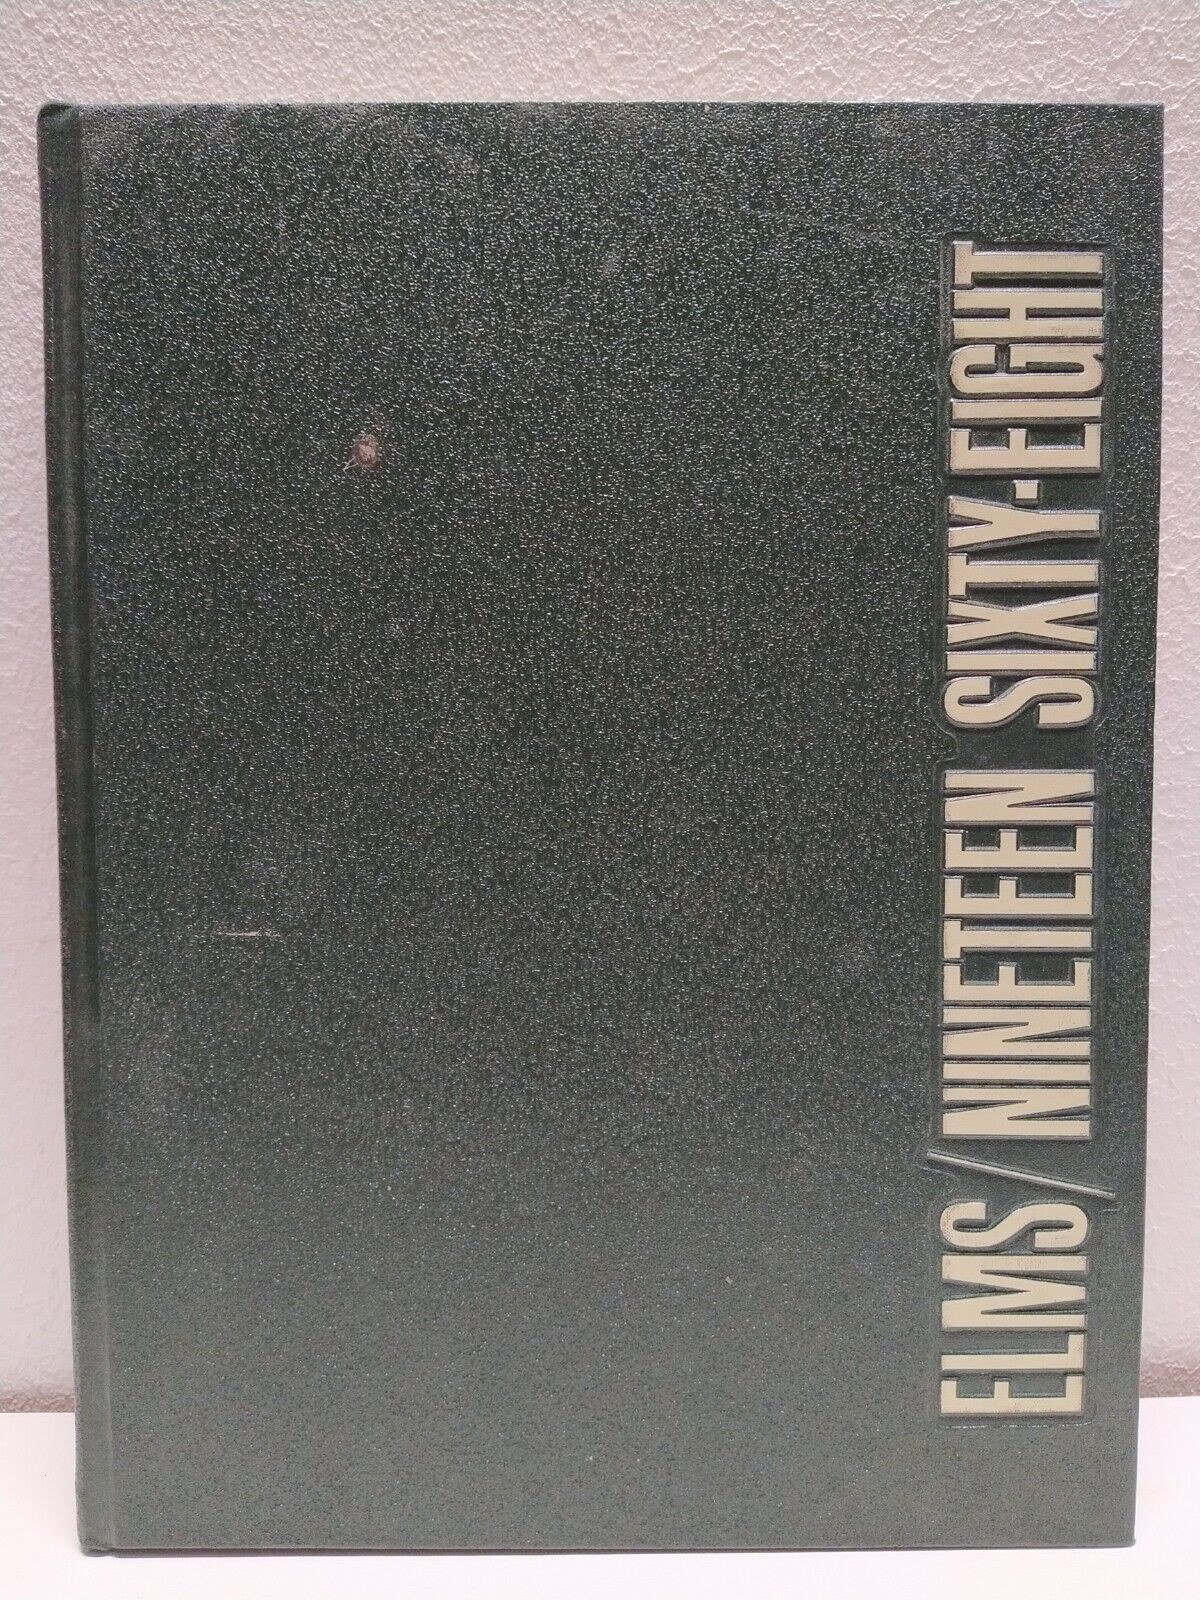 Buffalo State University College 1968 Yearbook